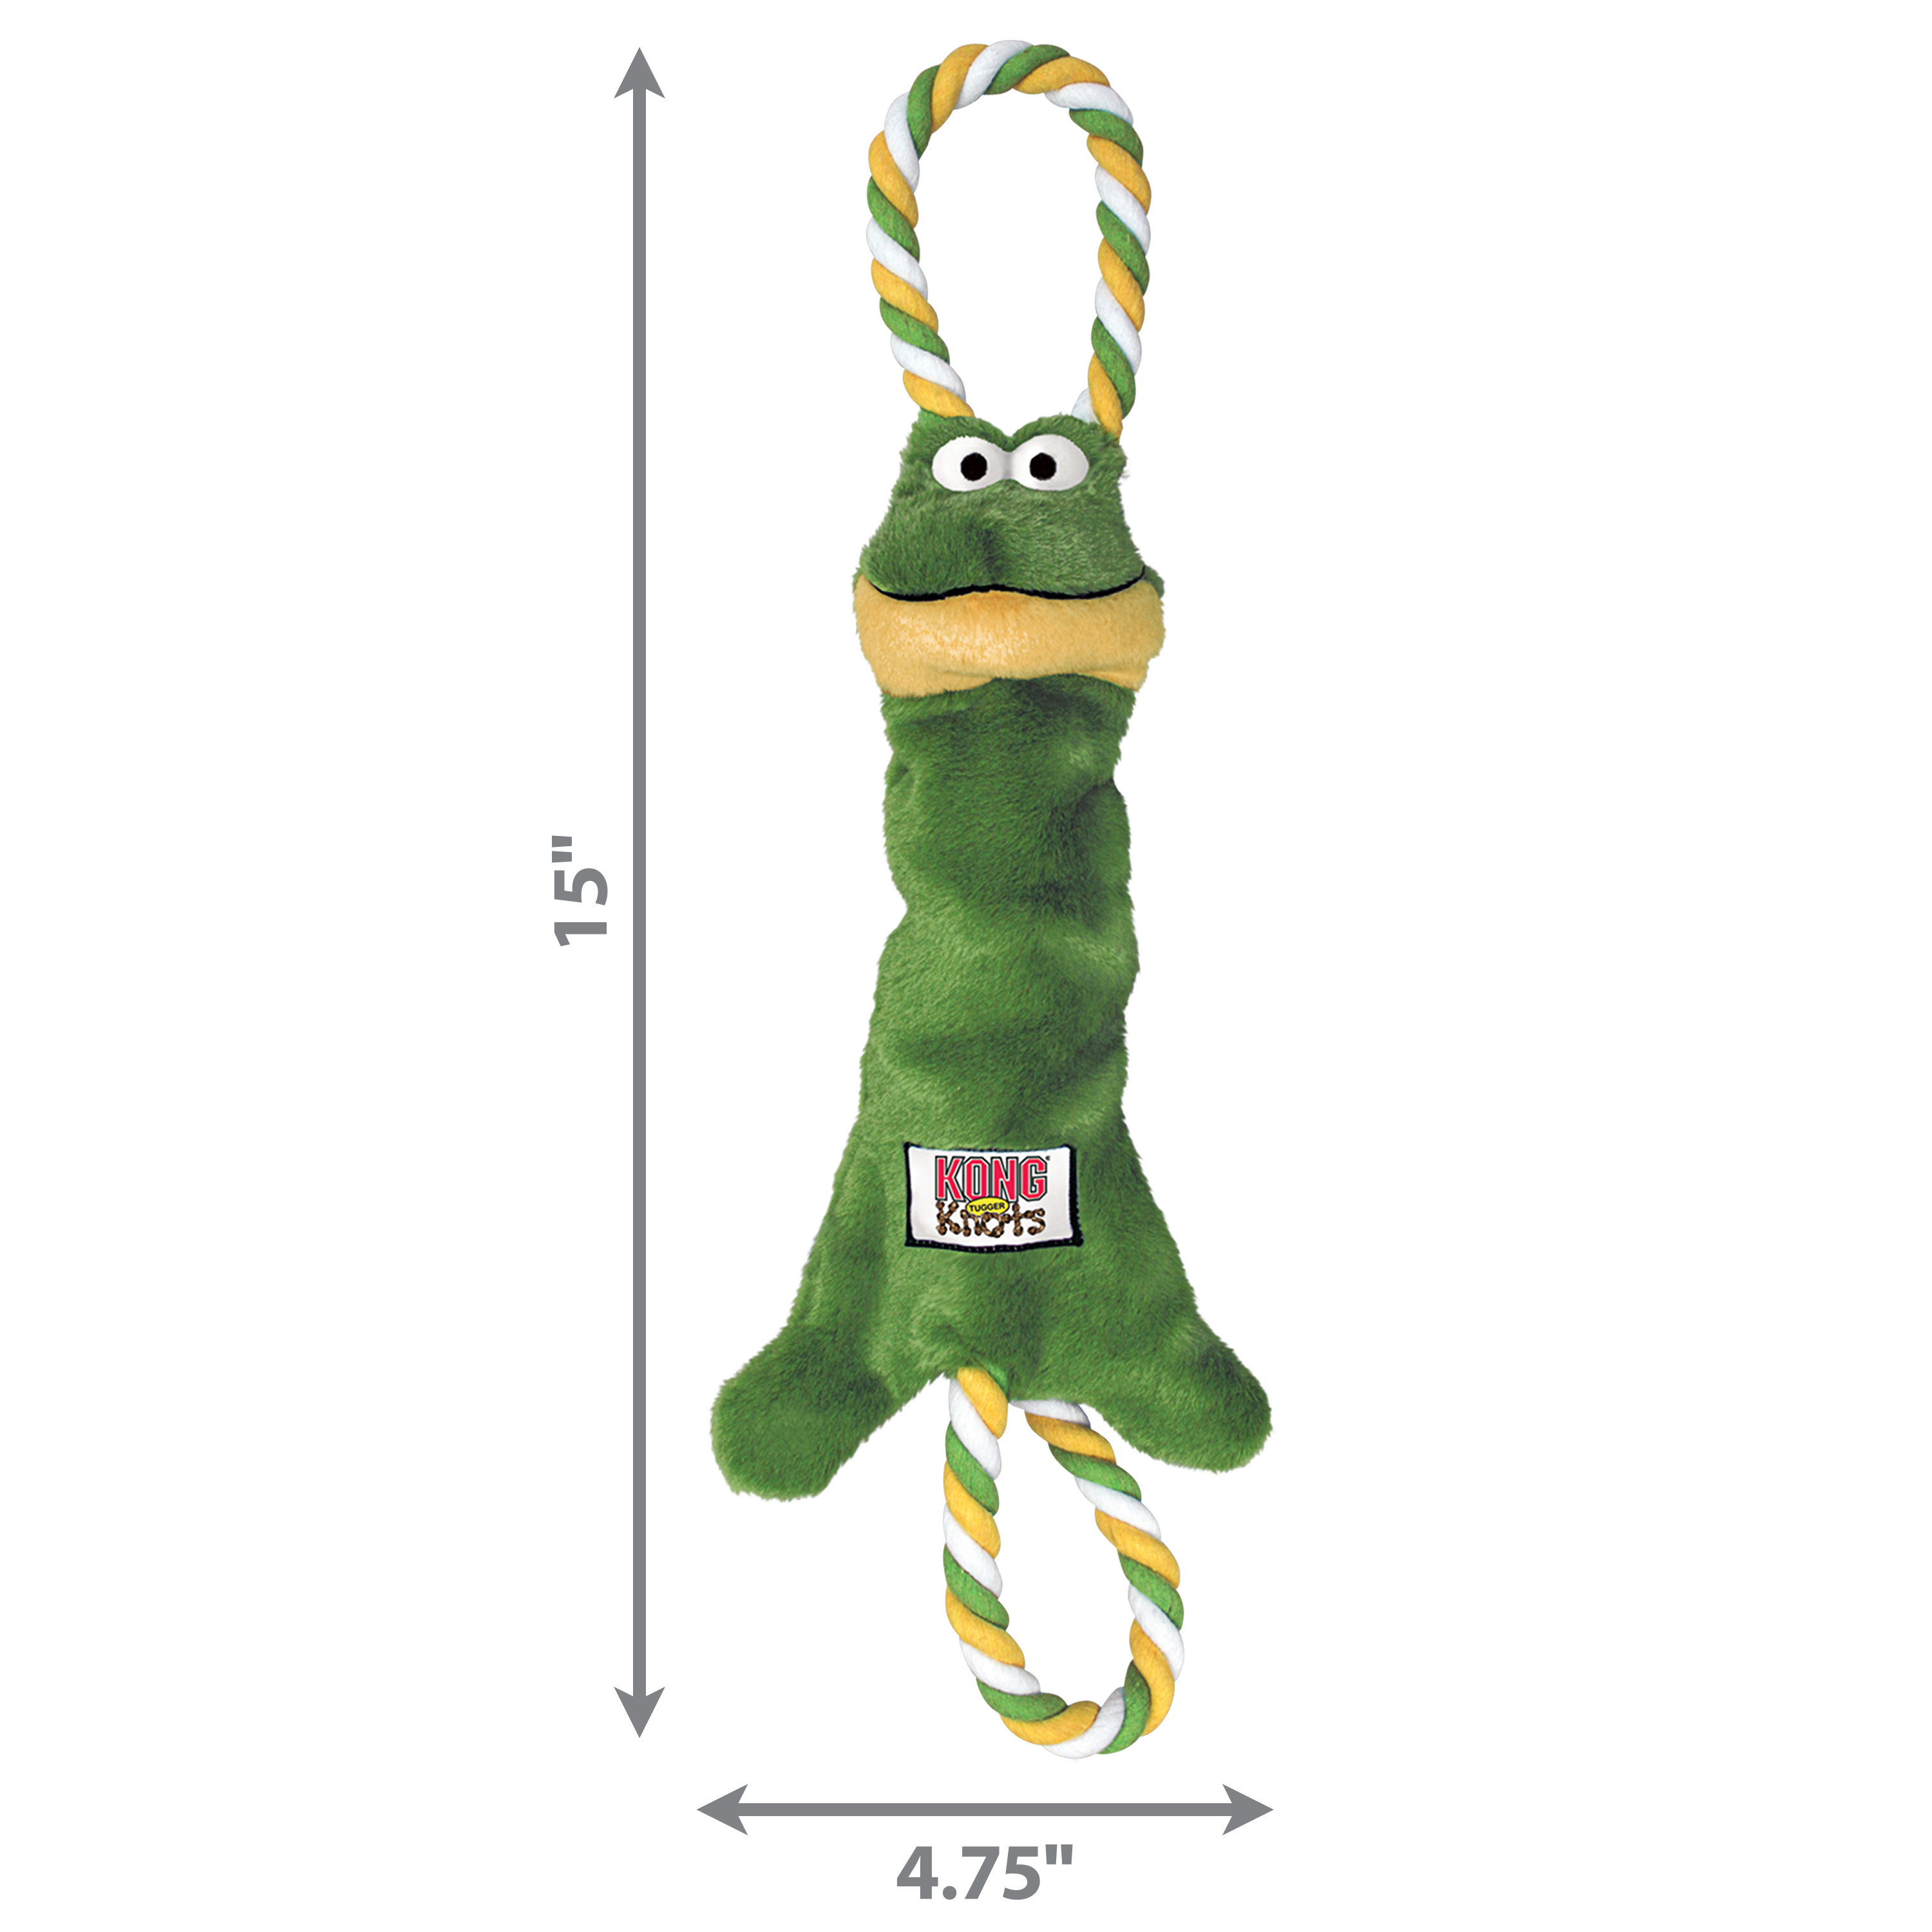 Tugger Knots Frog dimoffpack product image